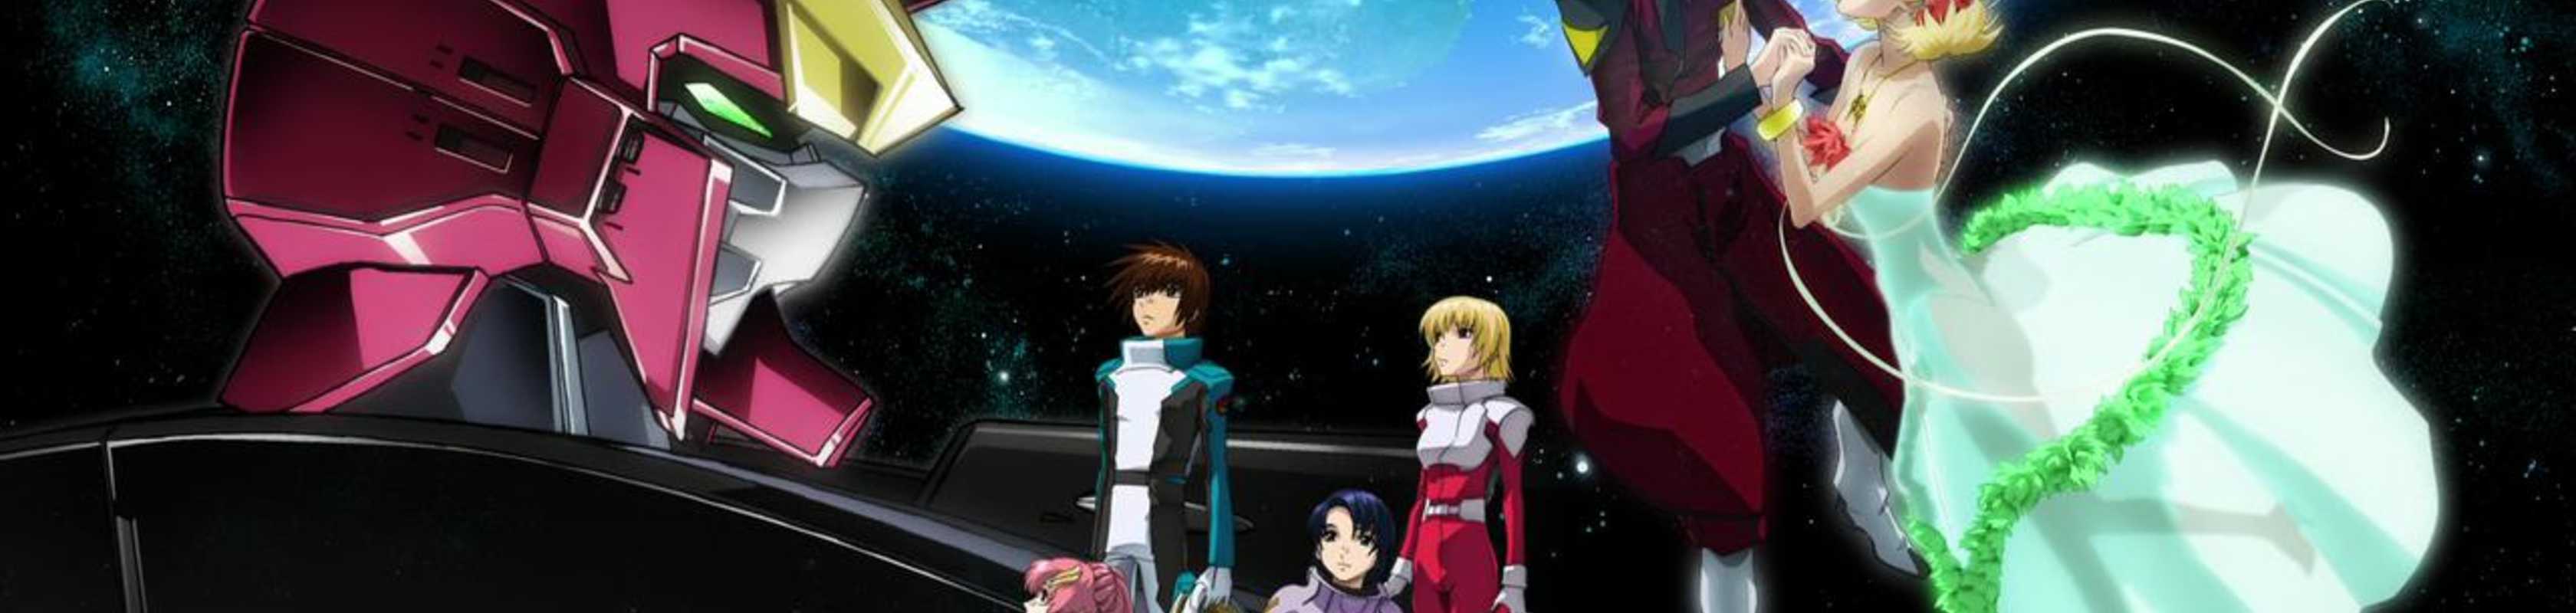 Mobile Suit Gundam SEED Destiny cover